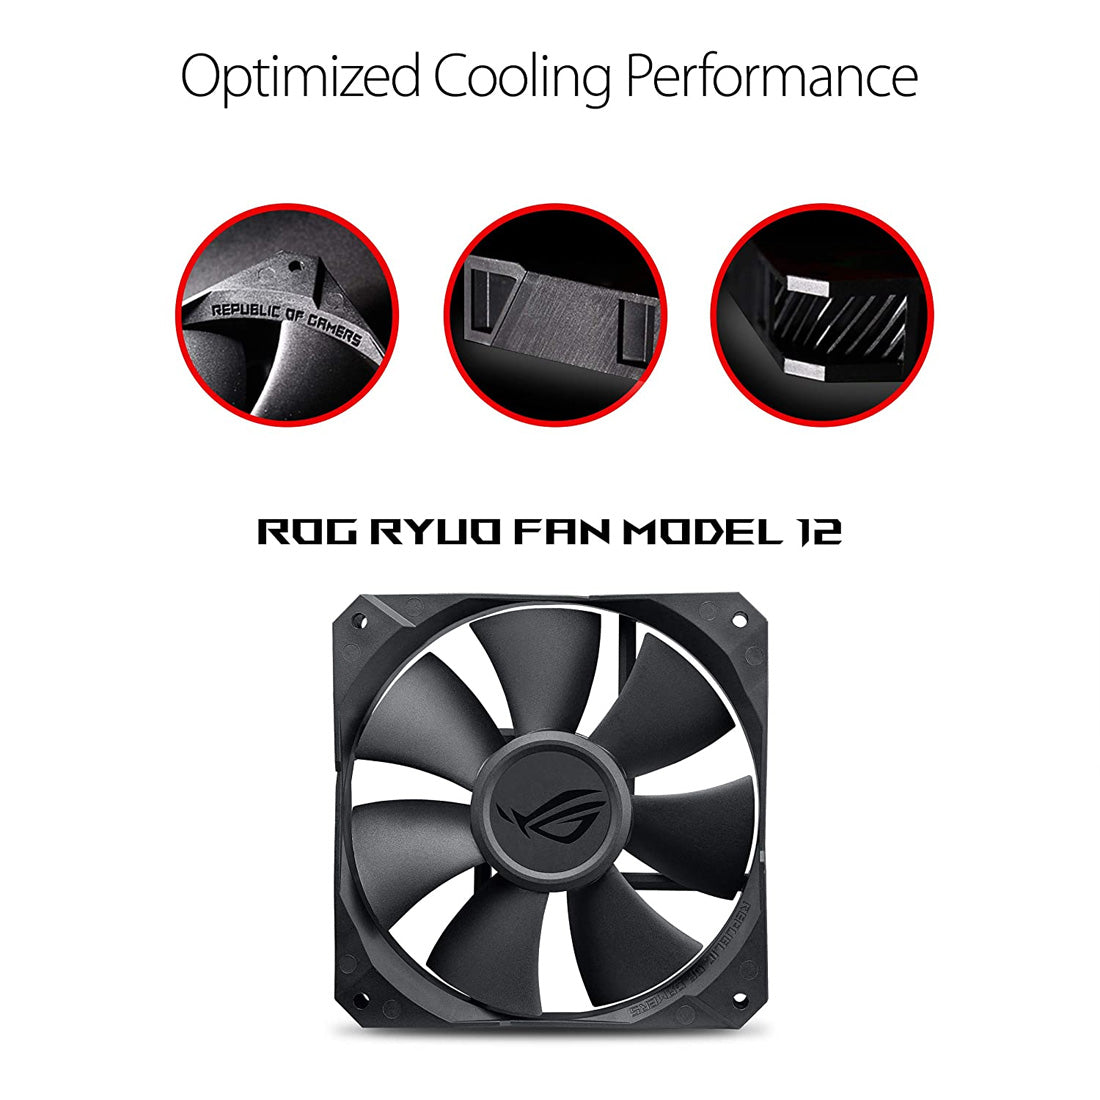 ASUS ROG RYUO 240 AIO Liquid Cooler From TPSTECH.in